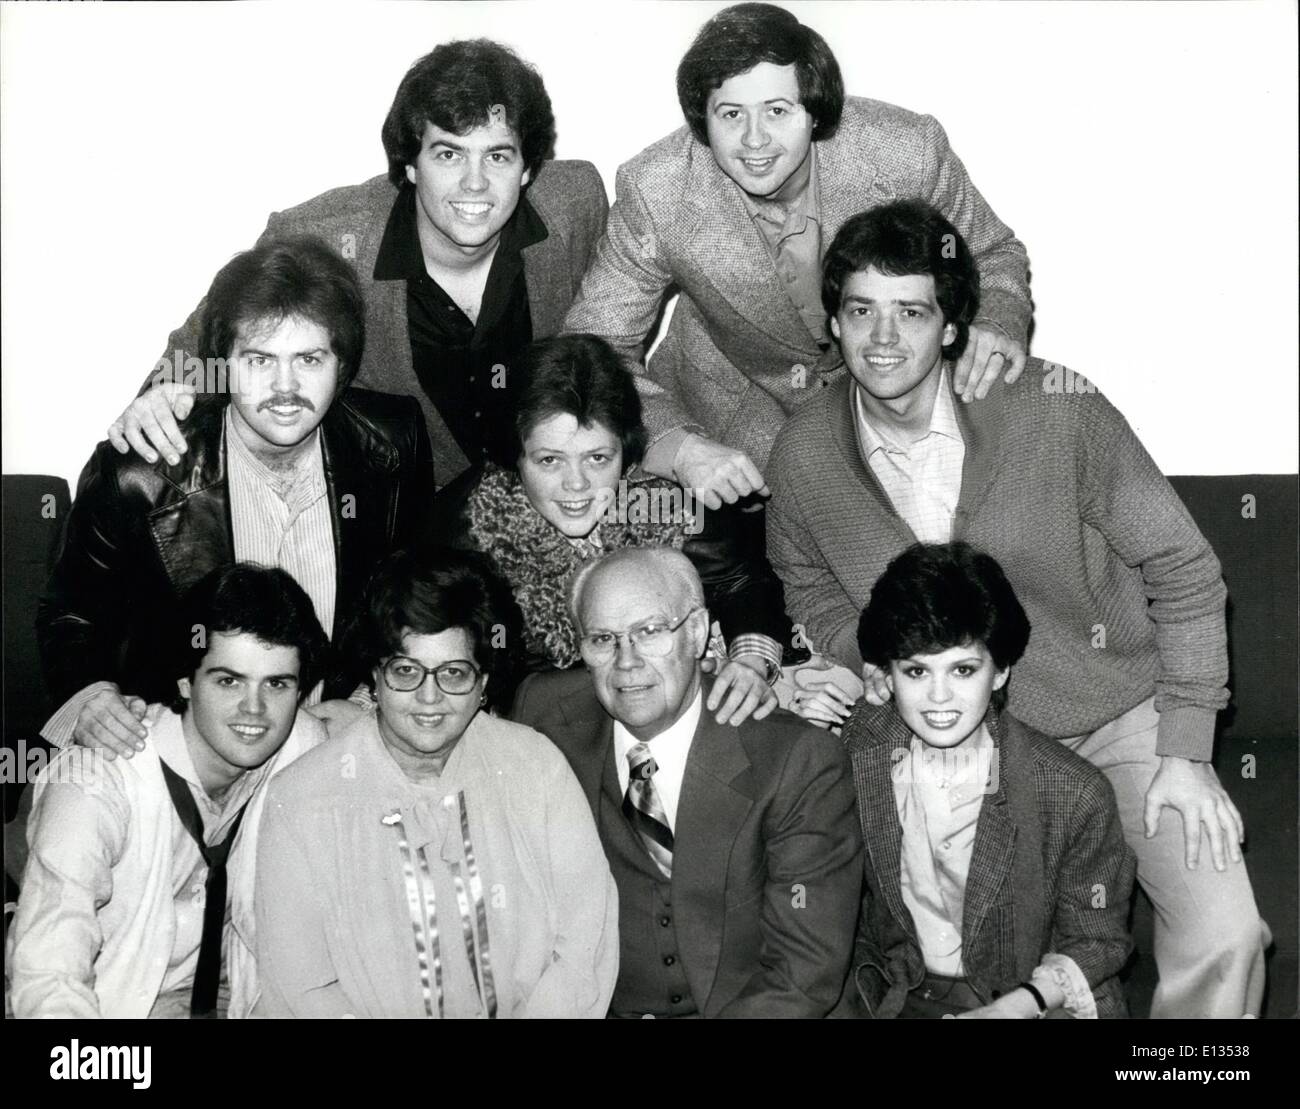 Feb. 26, 2012 - The Osmonds come to England. Back in England for the first time since 1975 are the famous family of pop. They will play four concerts in all, the highlight of their visit being a special charity show at the Albert Hall, which will be attended by HRH Princess Margaret. The proceeds from the concert will go towards the Horder centre for Arthritics and the Sunshine homes and schools for blind children. The Osmonds visitifollows a petition signed by more than 30,000 British fans. Photo Shows The entire Osmond family. Front row (1 to R) Donny, aproud Mr and Mrs Osmond , and Marie Stock Photo